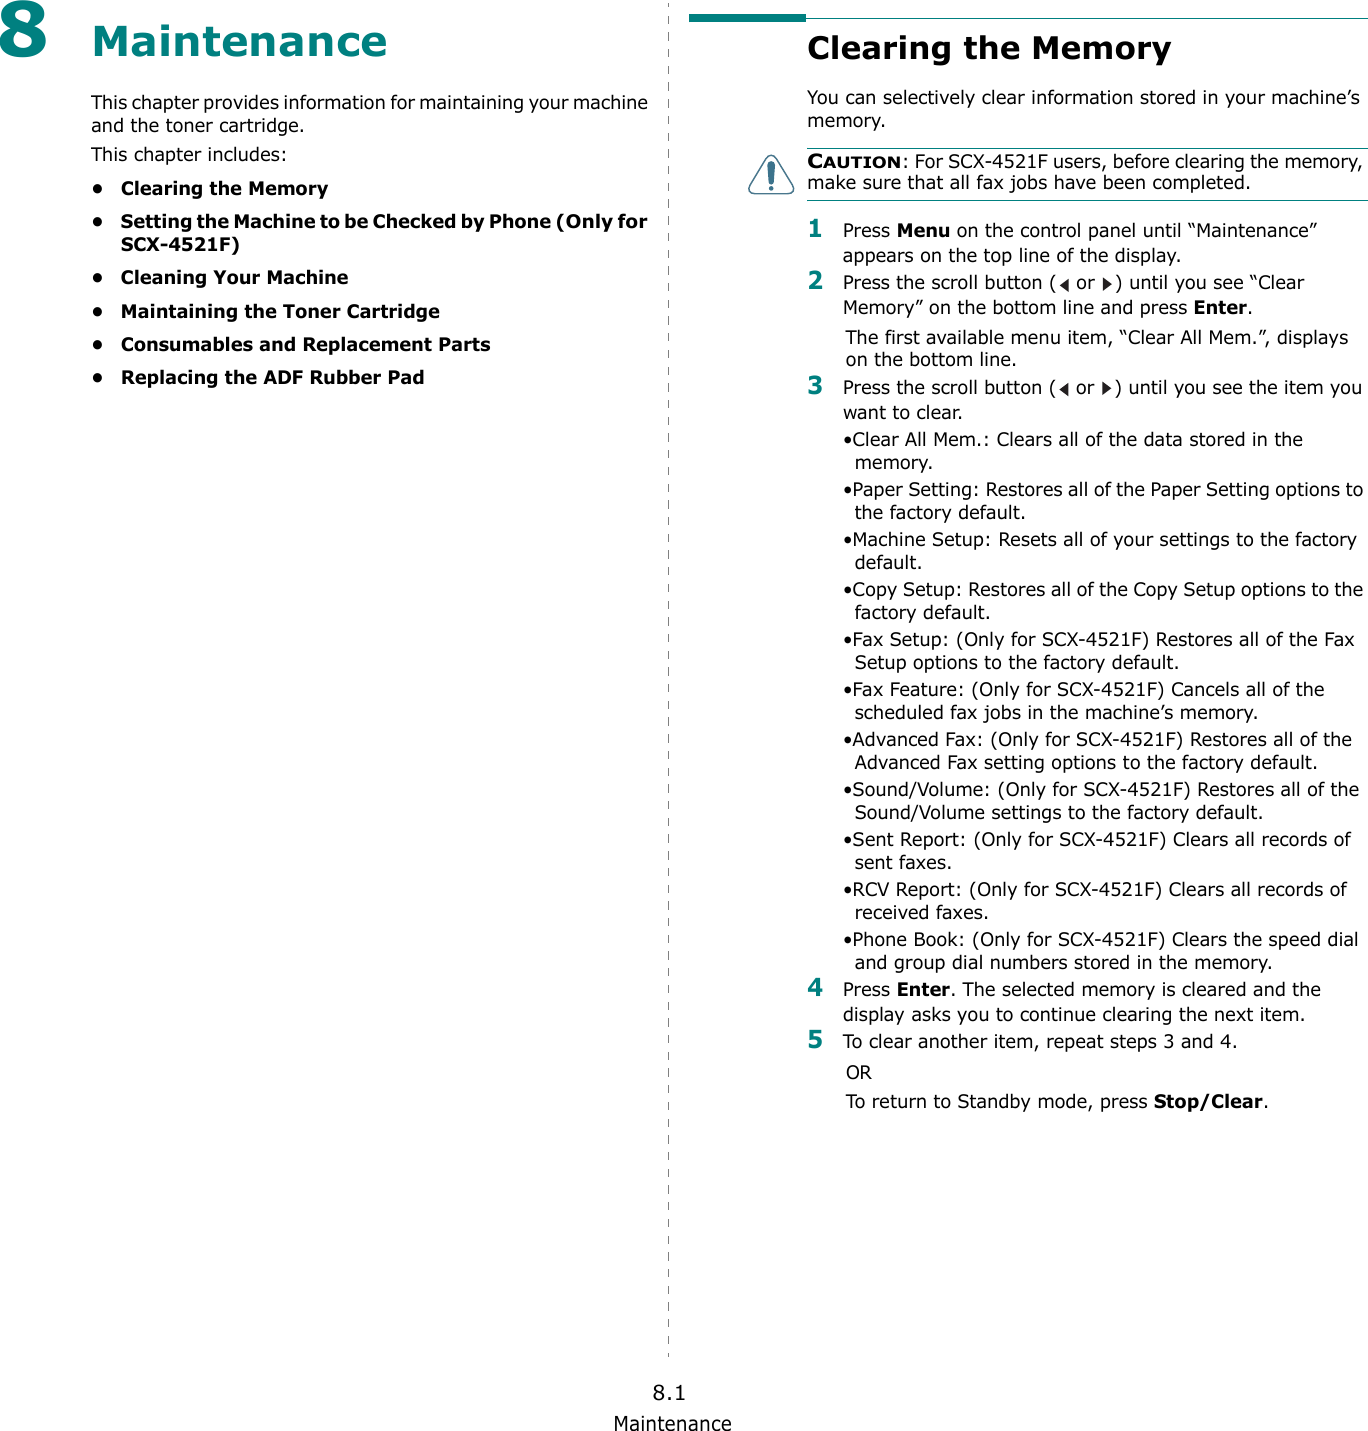 Maintenance8.18MaintenanceThis chapter provides information for maintaining your machine and the toner cartridge.This chapter includes:• Clearing the Memory• Setting the Machine to be Checked by Phone (Only for SCX-4521F)• Cleaning Your Machine• Maintaining the Toner Cartridge• Consumables and Replacement Parts• Replacing the ADF Rubber PadClearing the MemoryYou can selectively clear information stored in your machine’s memory.CAUTION: For SCX-4521F users, before clearing the memory, make sure that all fax jobs have been completed. 1Press Menu on the control panel until “Maintenance” appears on the top line of the display. 2Press the scroll button (  or  ) until you see “Clear Memory” on the bottom line and press Enter.The first available menu item, “Clear All Mem.”, displays on the bottom line.3Press the scroll button (  or  ) until you see the item you want to clear.•Clear All Mem.: Clears all of the data stored in the memory. •Paper Setting: Restores all of the Paper Setting options to the factory default.•Machine Setup: Resets all of your settings to the factory default.•Copy Setup: Restores all of the Copy Setup options to the factory default.•Fax Setup: (Only for SCX-4521F) Restores all of the Fax Setup options to the factory default.•Fax Feature: (Only for SCX-4521F) Cancels all of the scheduled fax jobs in the machine’s memory.•Advanced Fax: (Only for SCX-4521F) Restores all of the Advanced Fax setting options to the factory default.•Sound/Volume: (Only for SCX-4521F) Restores all of the Sound/Volume settings to the factory default.•Sent Report: (Only for SCX-4521F) Clears all records of sent faxes. •RCV Report: (Only for SCX-4521F) Clears all records of received faxes.•Phone Book: (Only for SCX-4521F) Clears the speed dial and group dial numbers stored in the memory.4Press Enter. The selected memory is cleared and the display asks you to continue clearing the next item.5To clear another item, repeat steps 3 and 4. ORTo return to Standby mode, press Stop/Clear. 